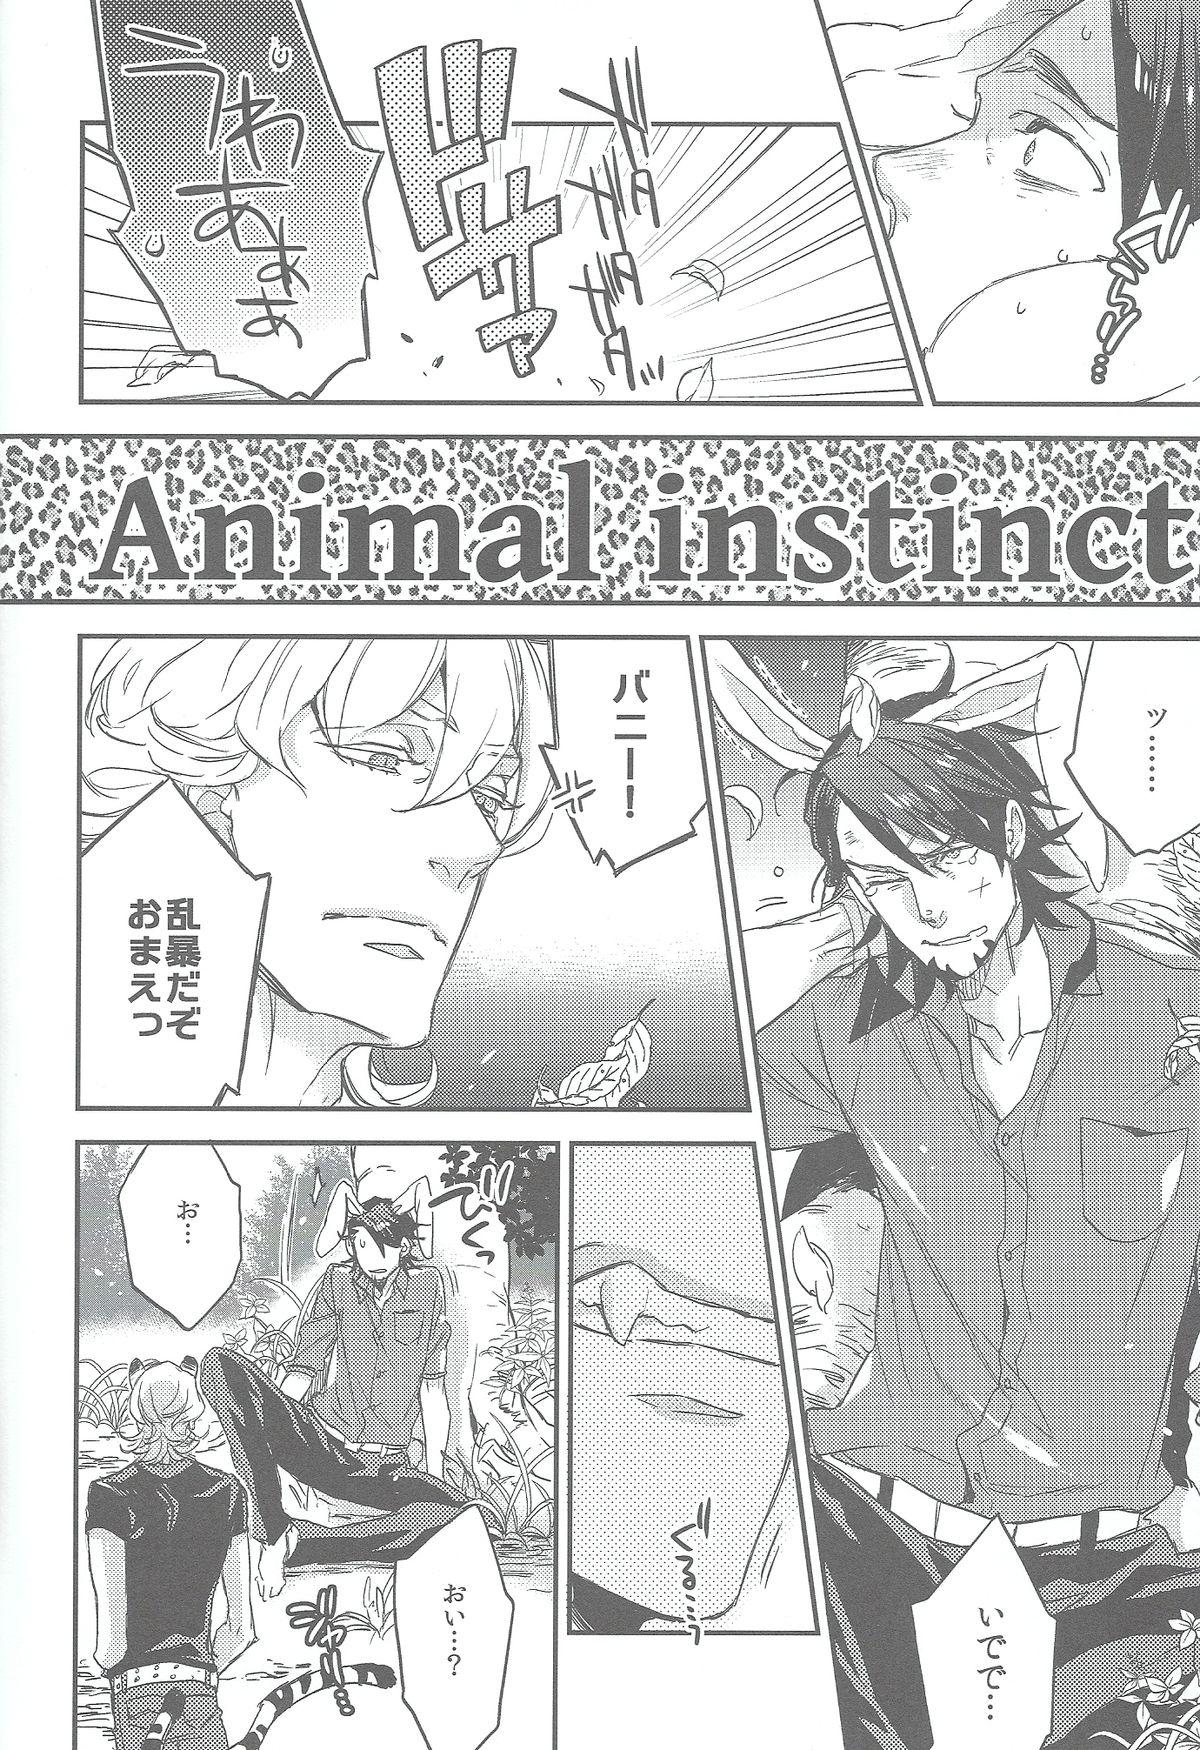 Clit Animal Instinct - Tiger and bunny Blows - Page 5